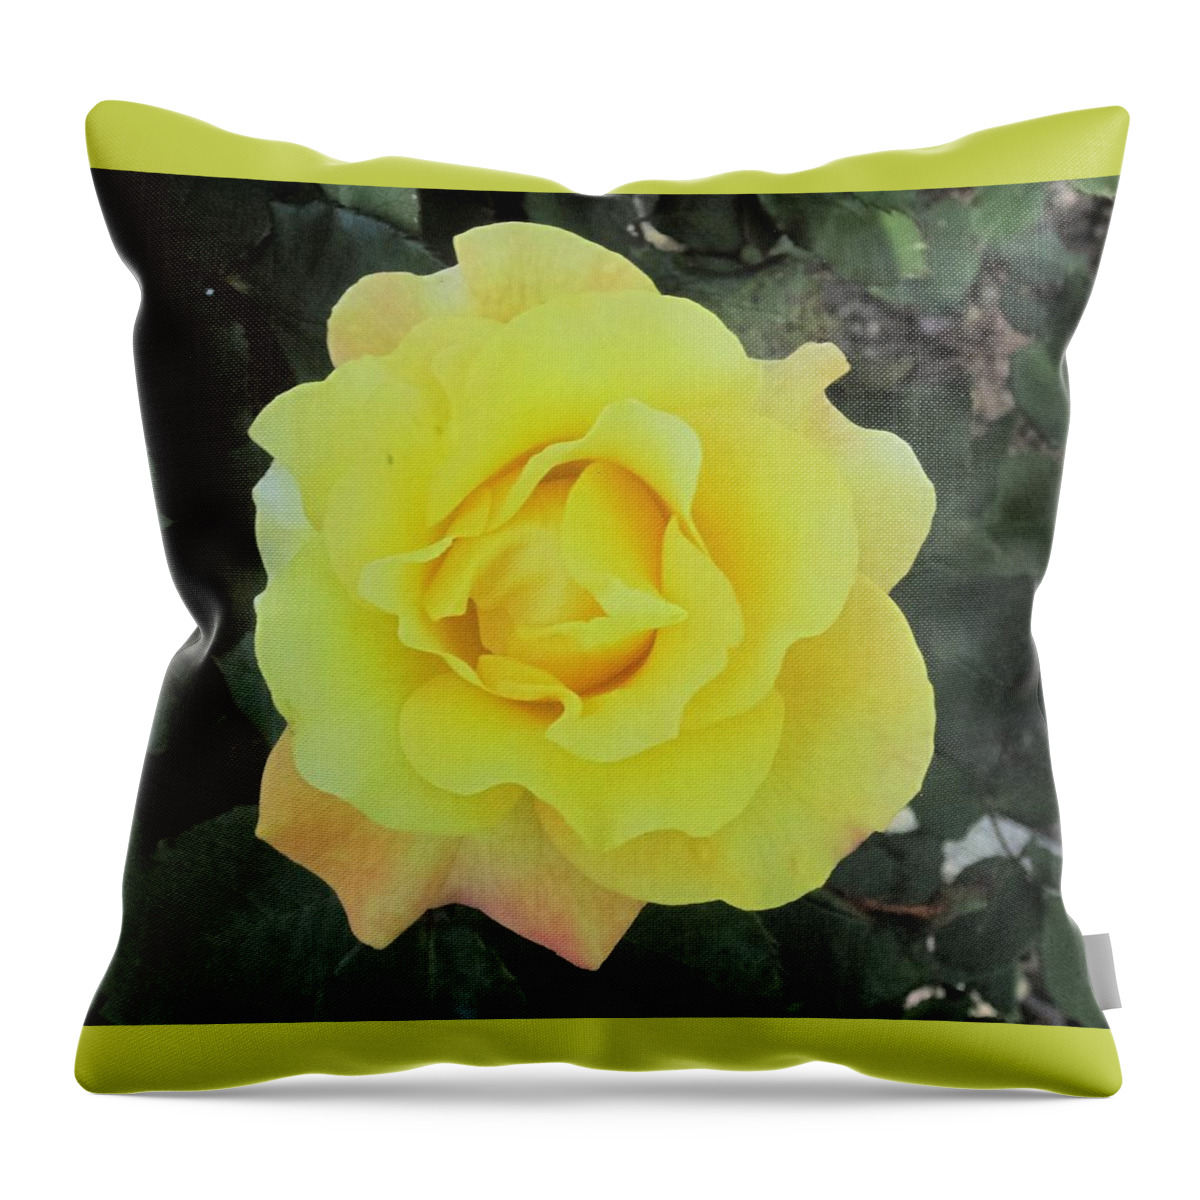 Photos Y Paul Meinerth Throw Pillow featuring the photograph Yellow Rose by Paul Meinerth